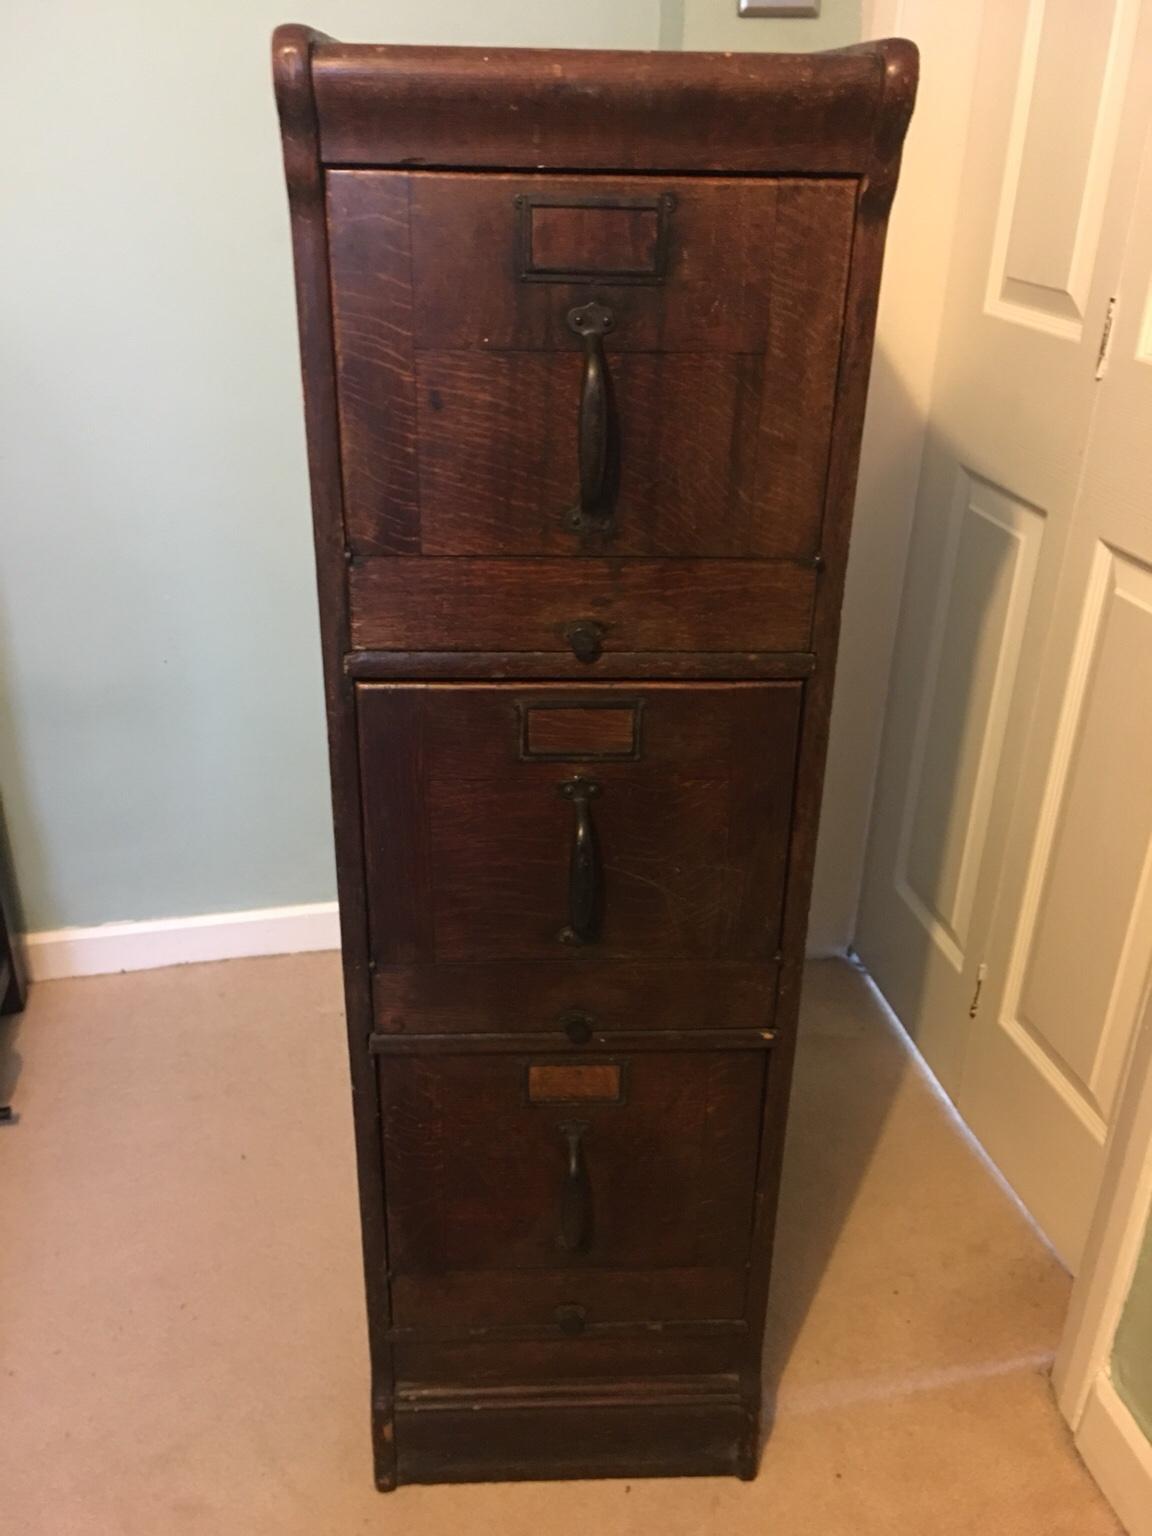 Globe Wernicke Filing Cabinet In Kt17 Ewell For 260 00 For Sale